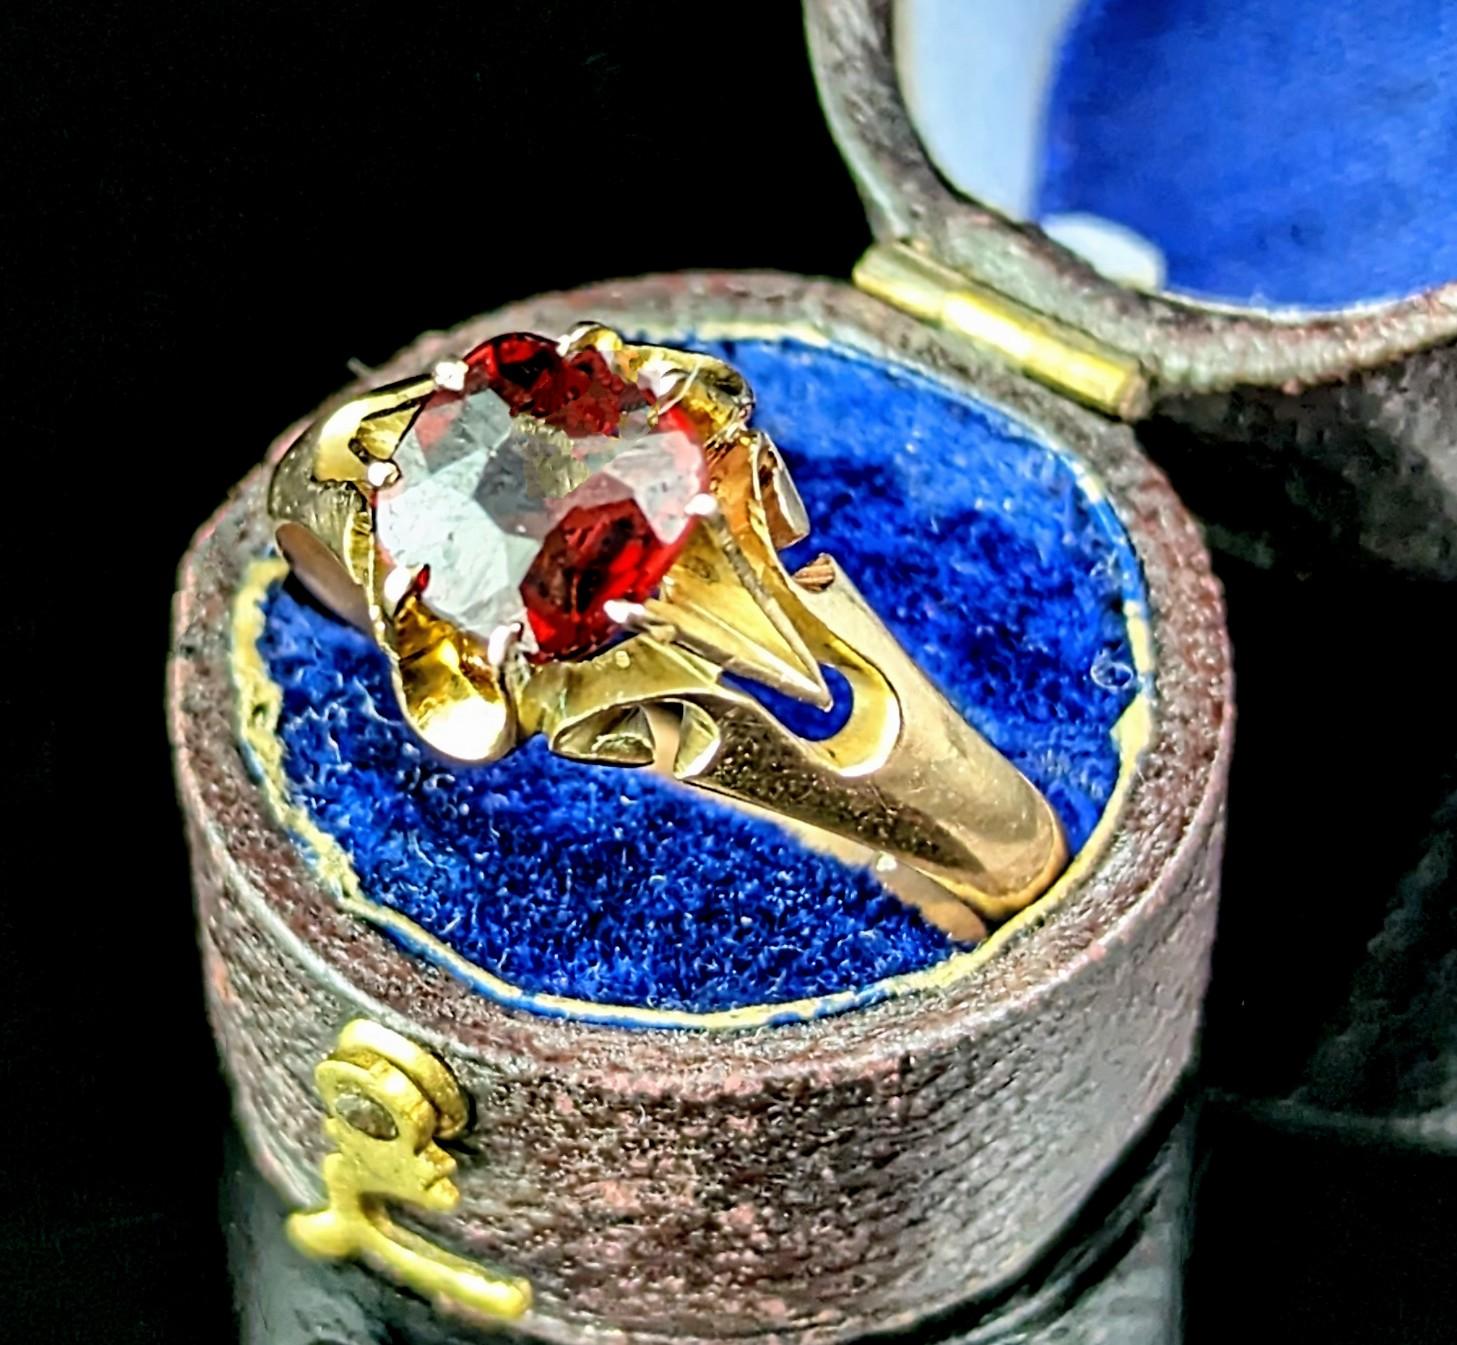 An interesting and handsome vintage Garnet solitaire ring.

It has a rich yellow gold mount with a single prong set cushion cut Garnet.

The ring has a decorative and elaborate face with short bifurcated shoulders and a smooth band.

The ring mount